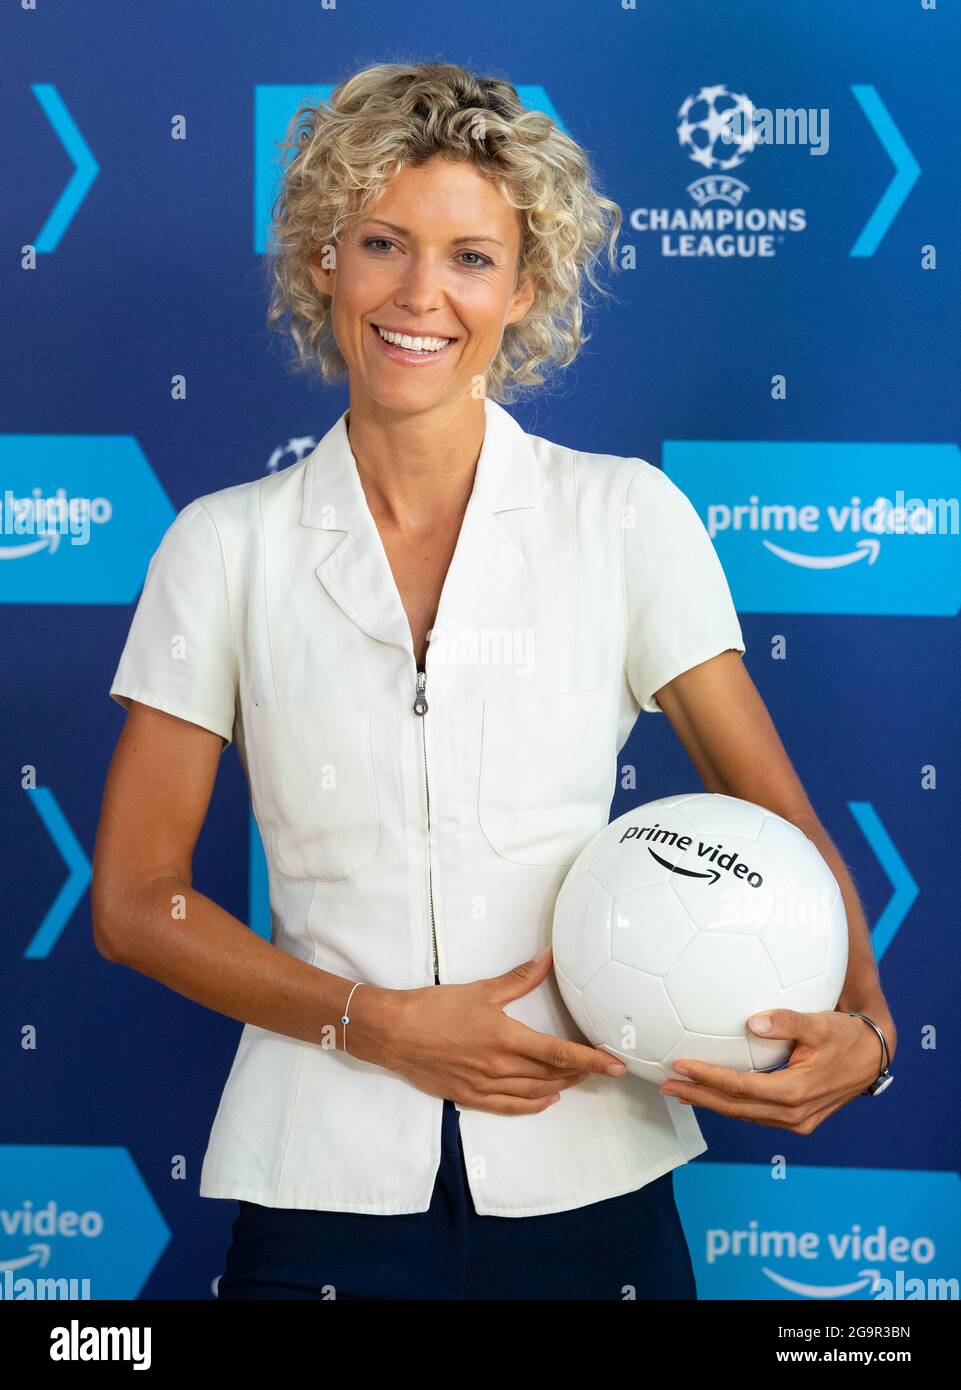 Munich, Germany. 27th July, 2021. Annika Zimmermann, presenter and  reporter, takes part in a press conference of Amazon Prime Video. Amazon  will be showing Champions League matches from the 2021/22 season. On